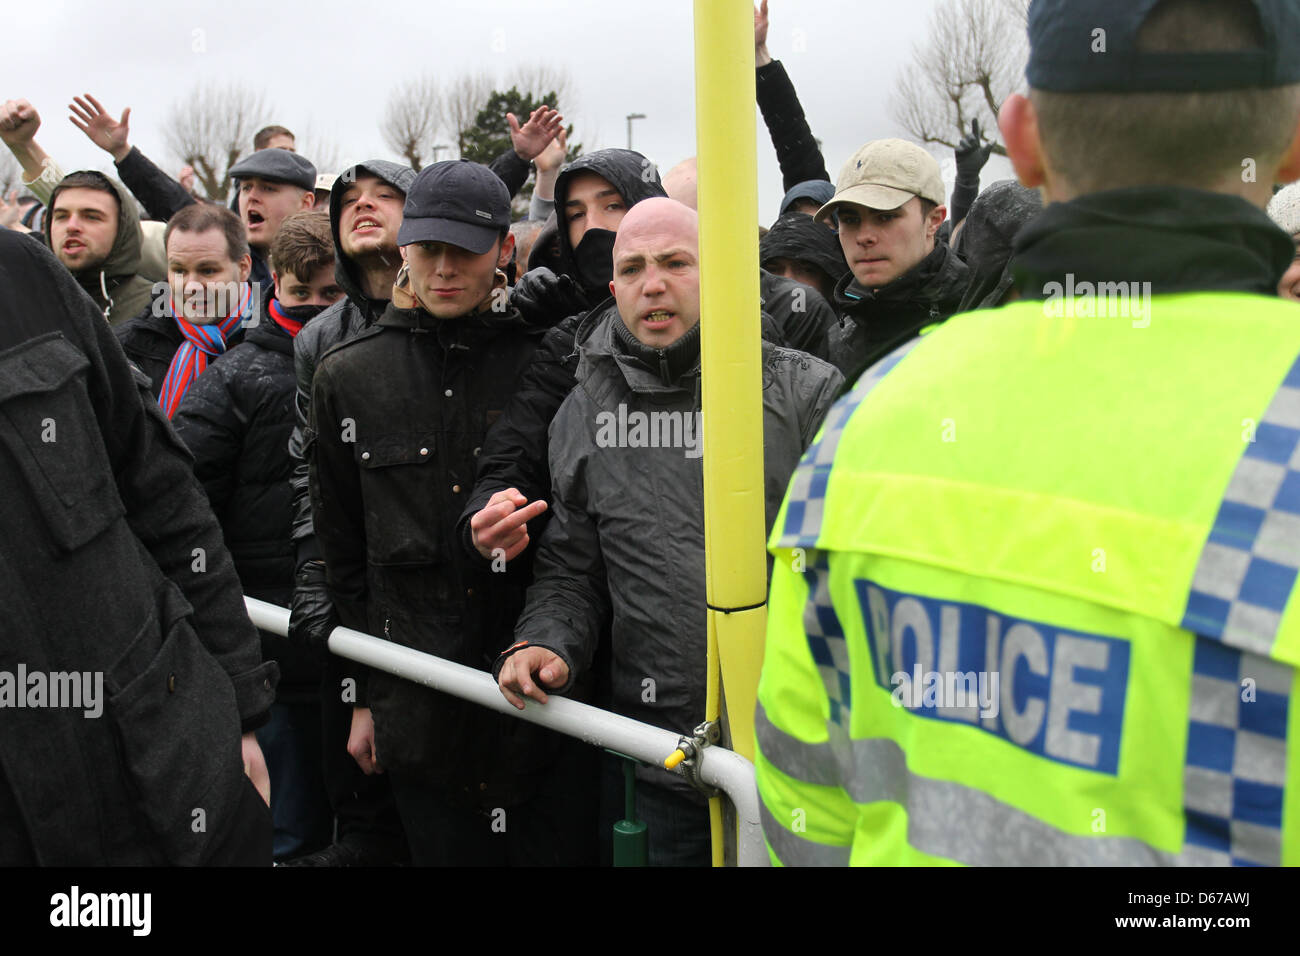 Crystal Palace FC football fans and Brighton and Hove Albion FC fans in confrontation in the street before a game at the AMEX. Stock Photo